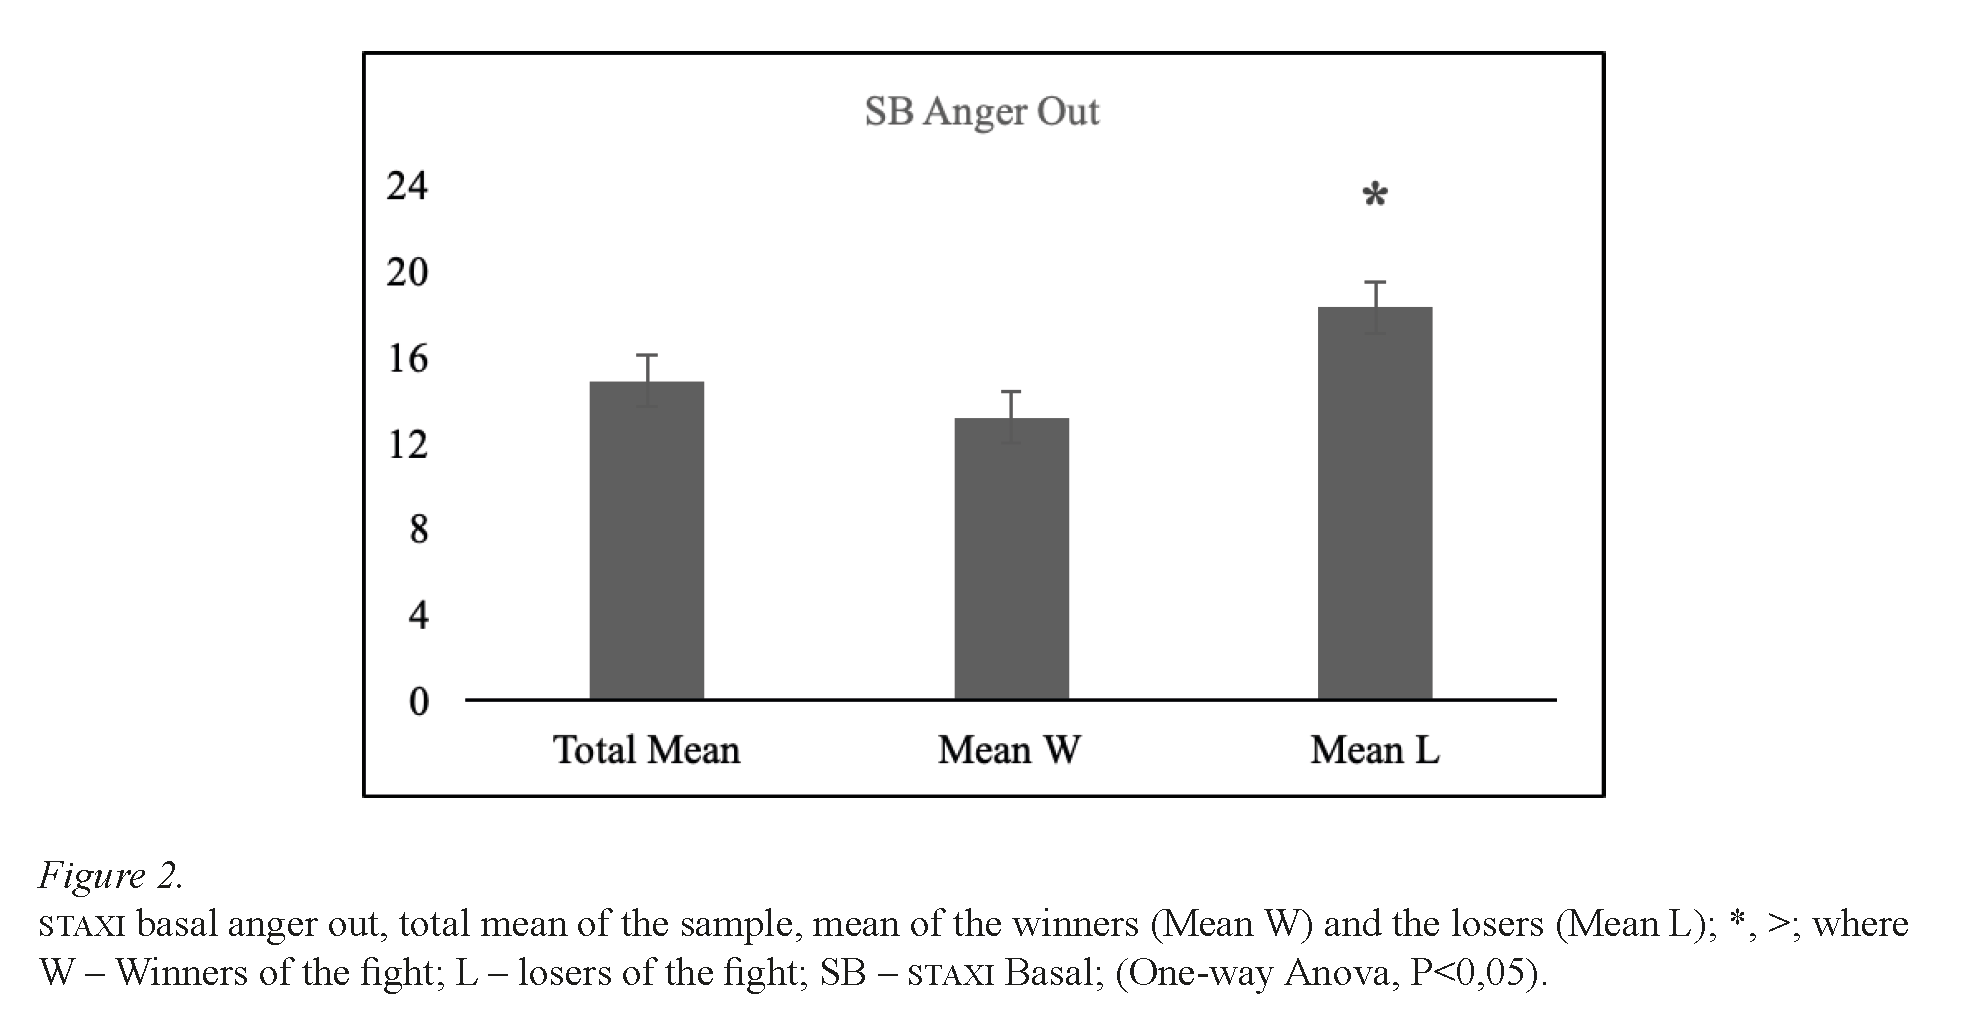 STAXI basal anger out, total mean of the sample, mean of the winners (Mean W) and the losers (Mean L)